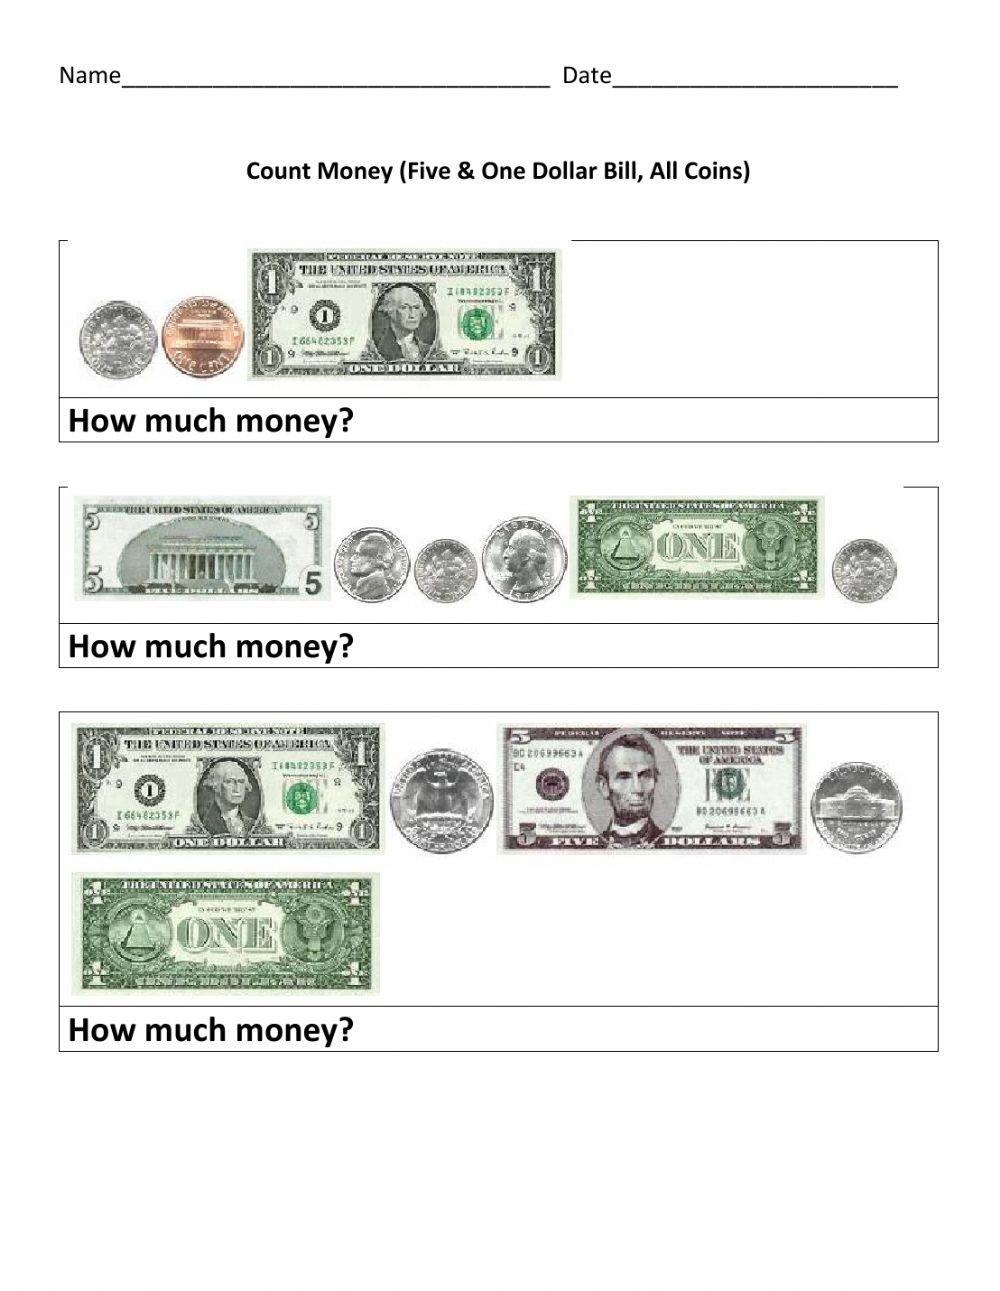 Money (Five & One Bills and Coins)